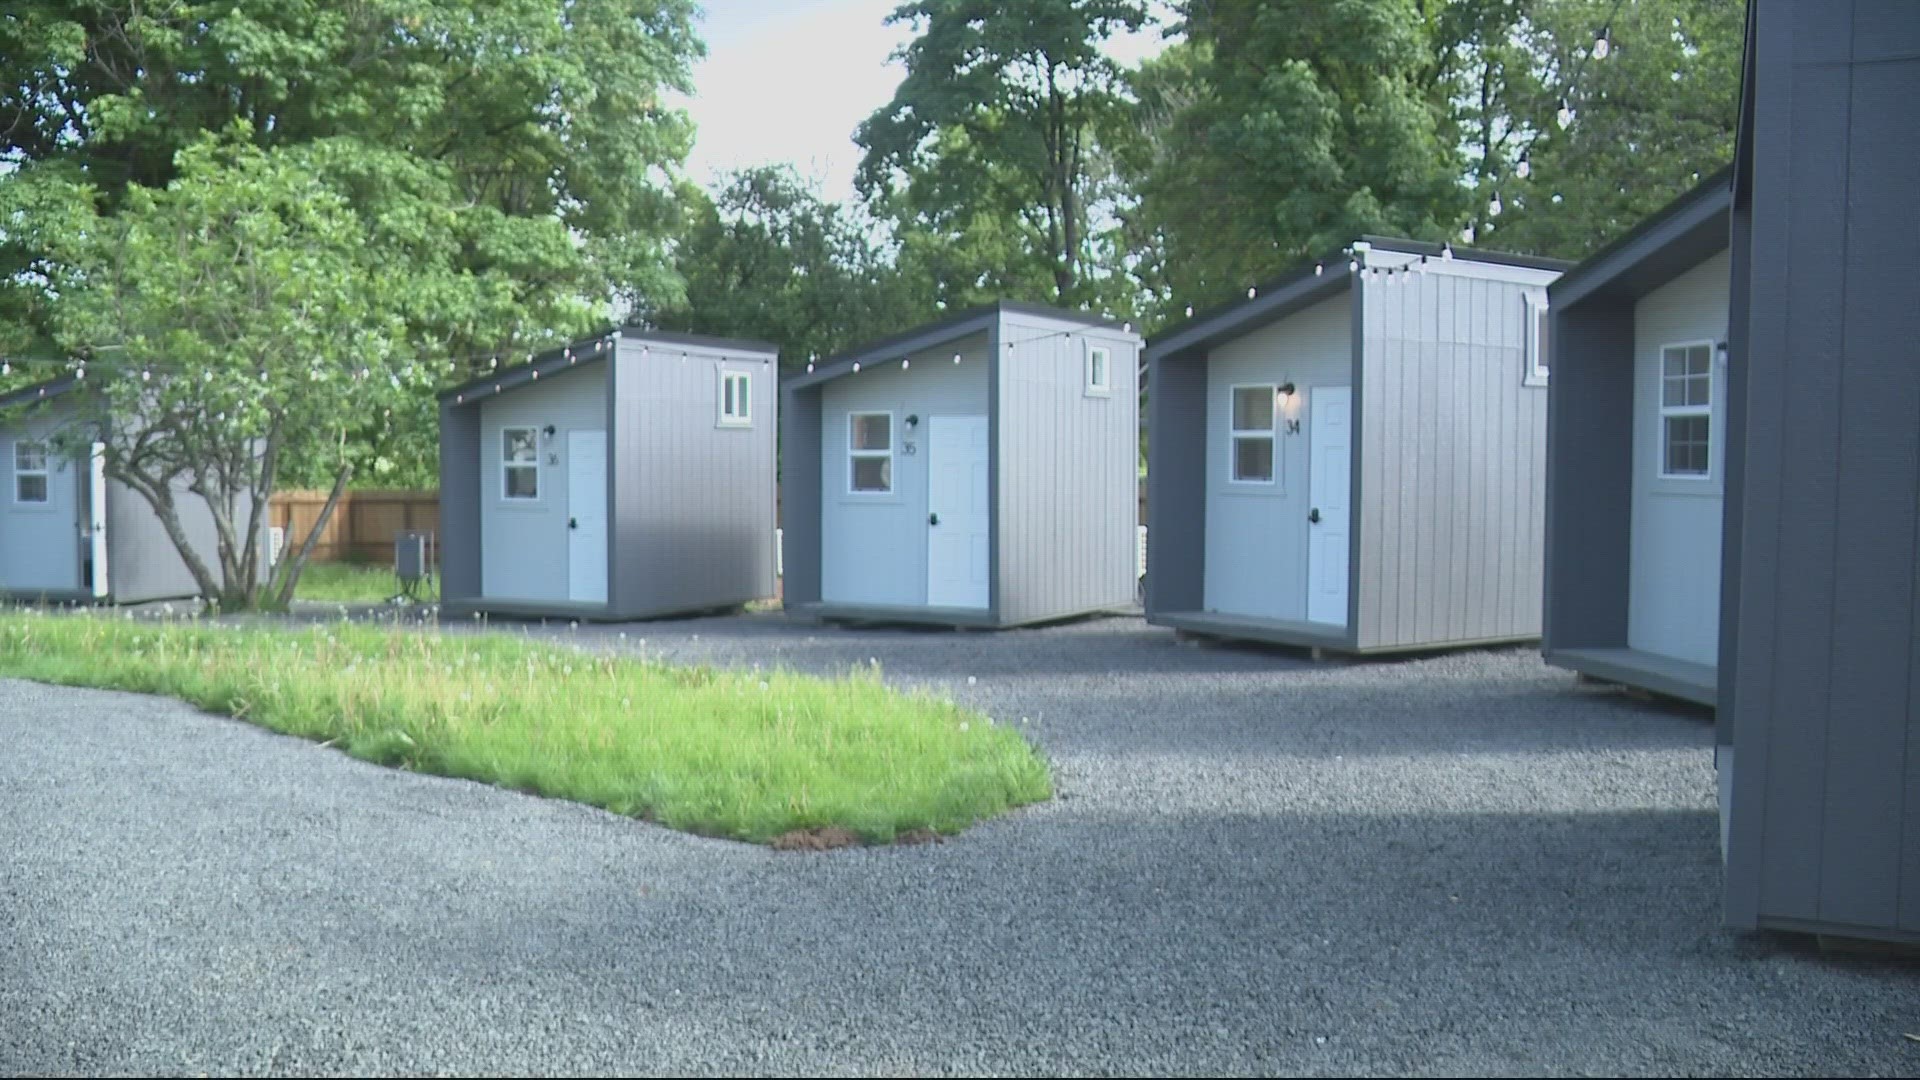 Peninsula Crossing Trail will feature 60 tiny homes. But neighbors say concerns over the village have been made worse by the city doing little to reach out to them.